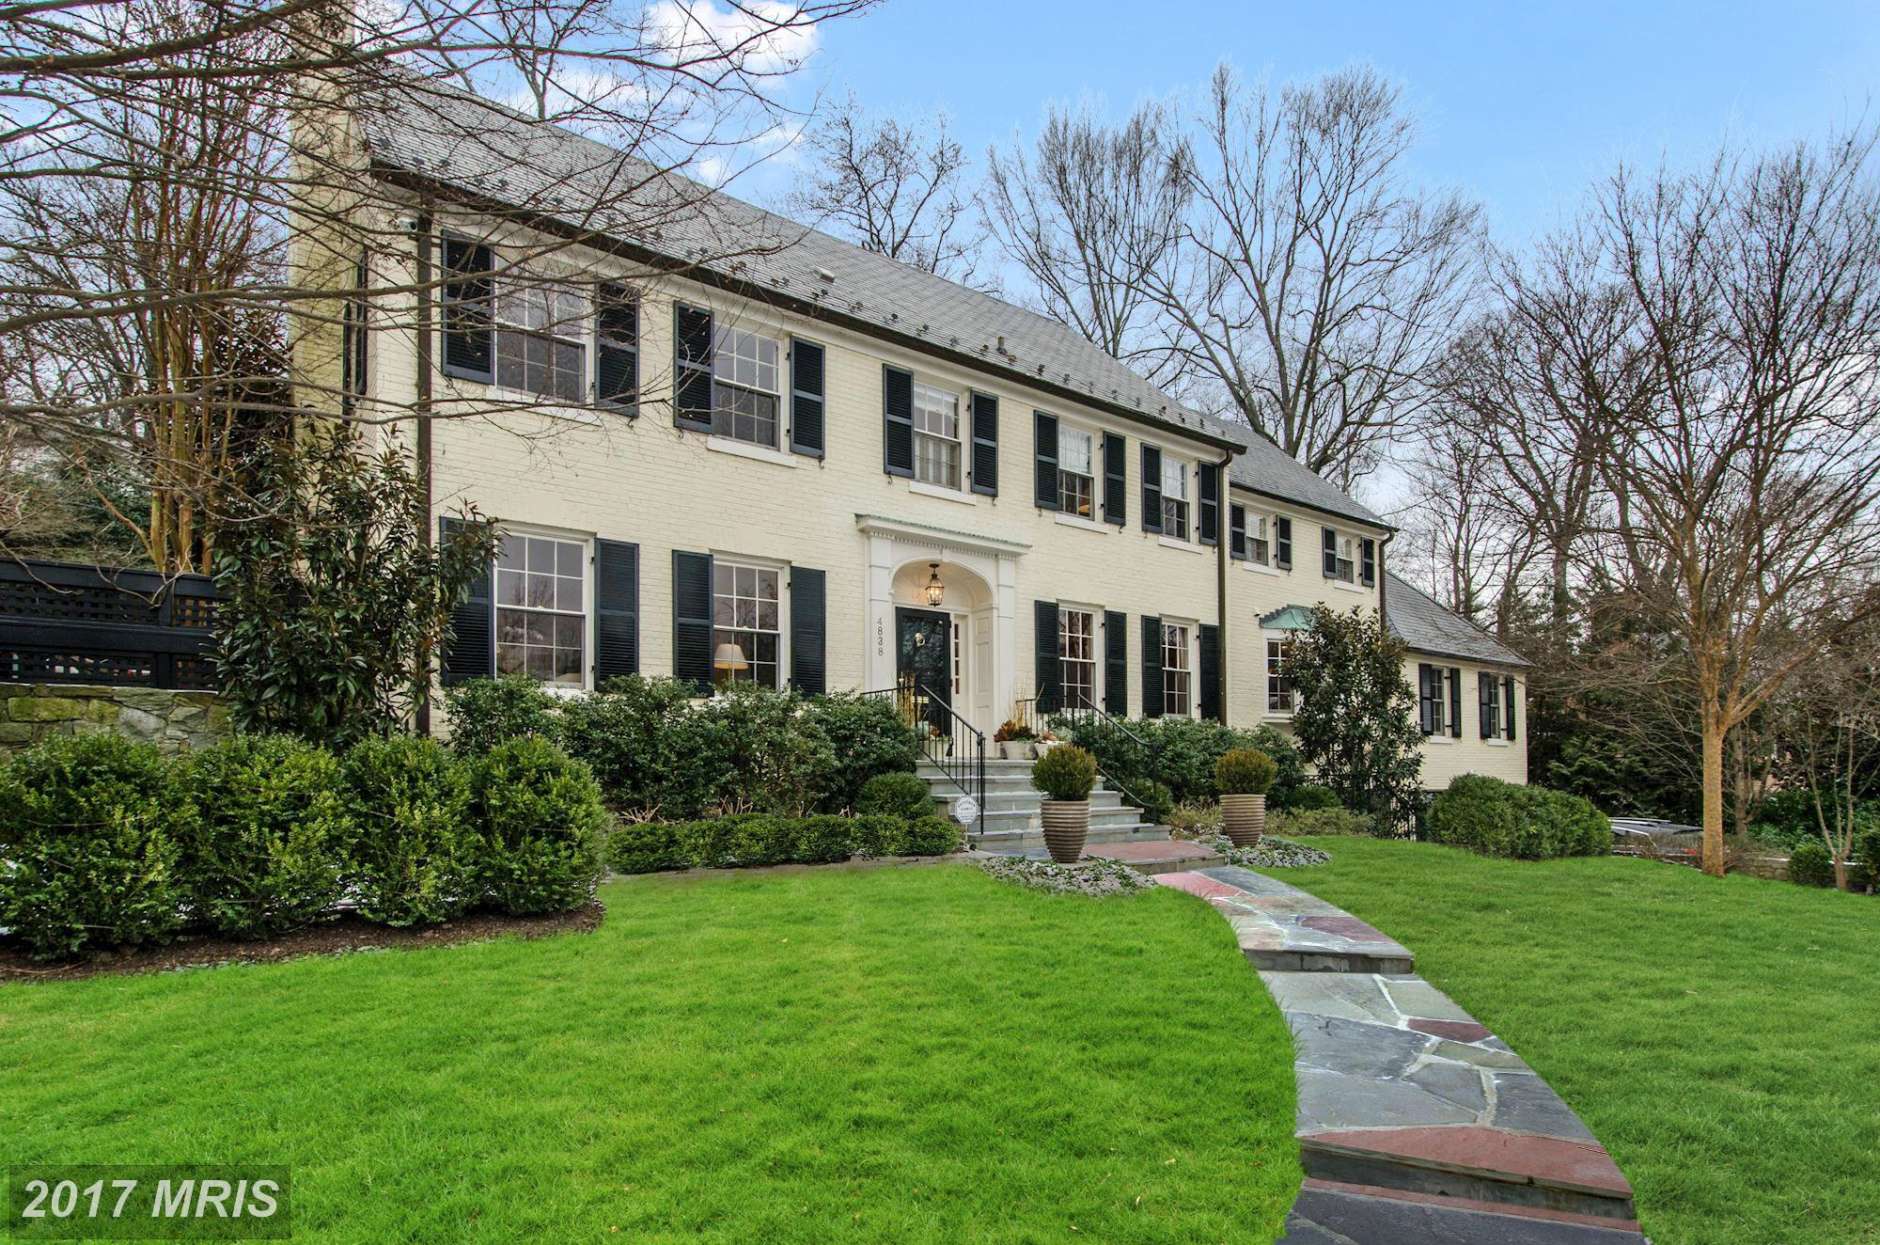 3. $3.625 million 4838 Rockwood Parkway NW Washington, D.C. This 1951 Colonial on Rockwood Parkway has six bedrooms, six bathrooms and a half-bath. It features entertaining rooms on the main level, a finished lower level and a back garden with terrace and pool. (Photo courtesy MRIS, a Bright MLS)